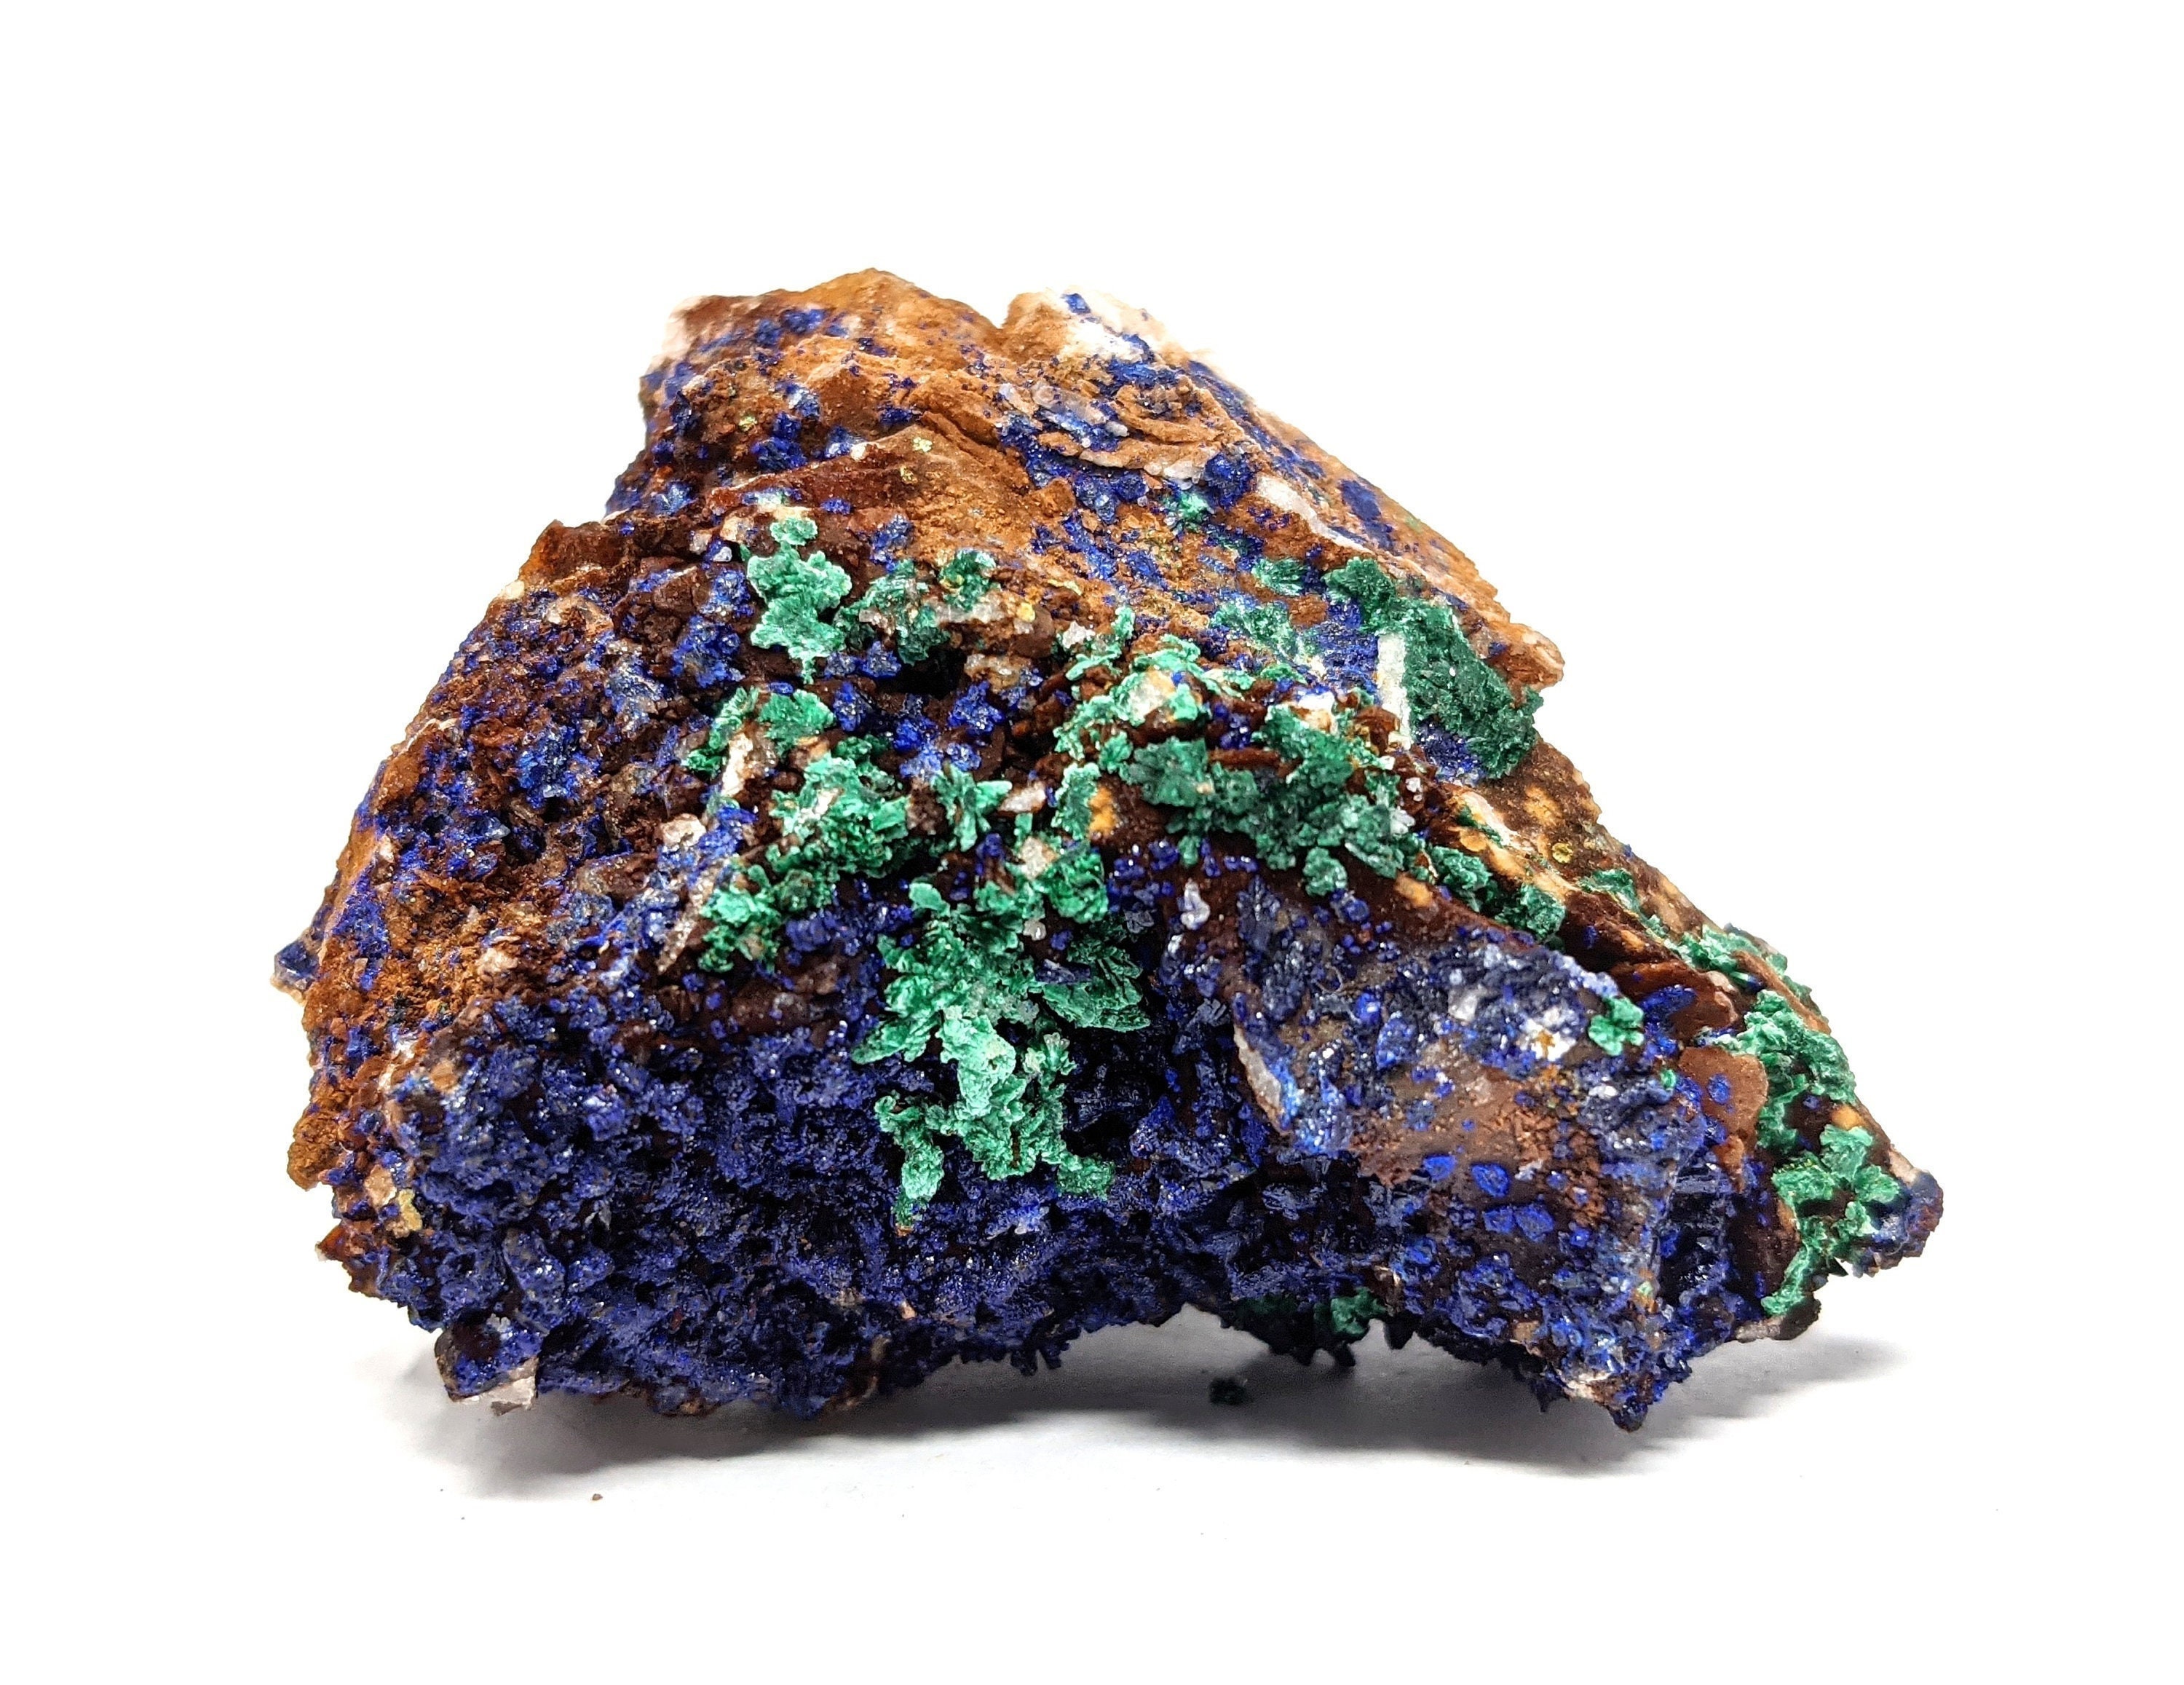 87 g 6.2 x 3 x 4.5 cm High Quality Azurite Crystals with Malachite on Matrix Personal Collection